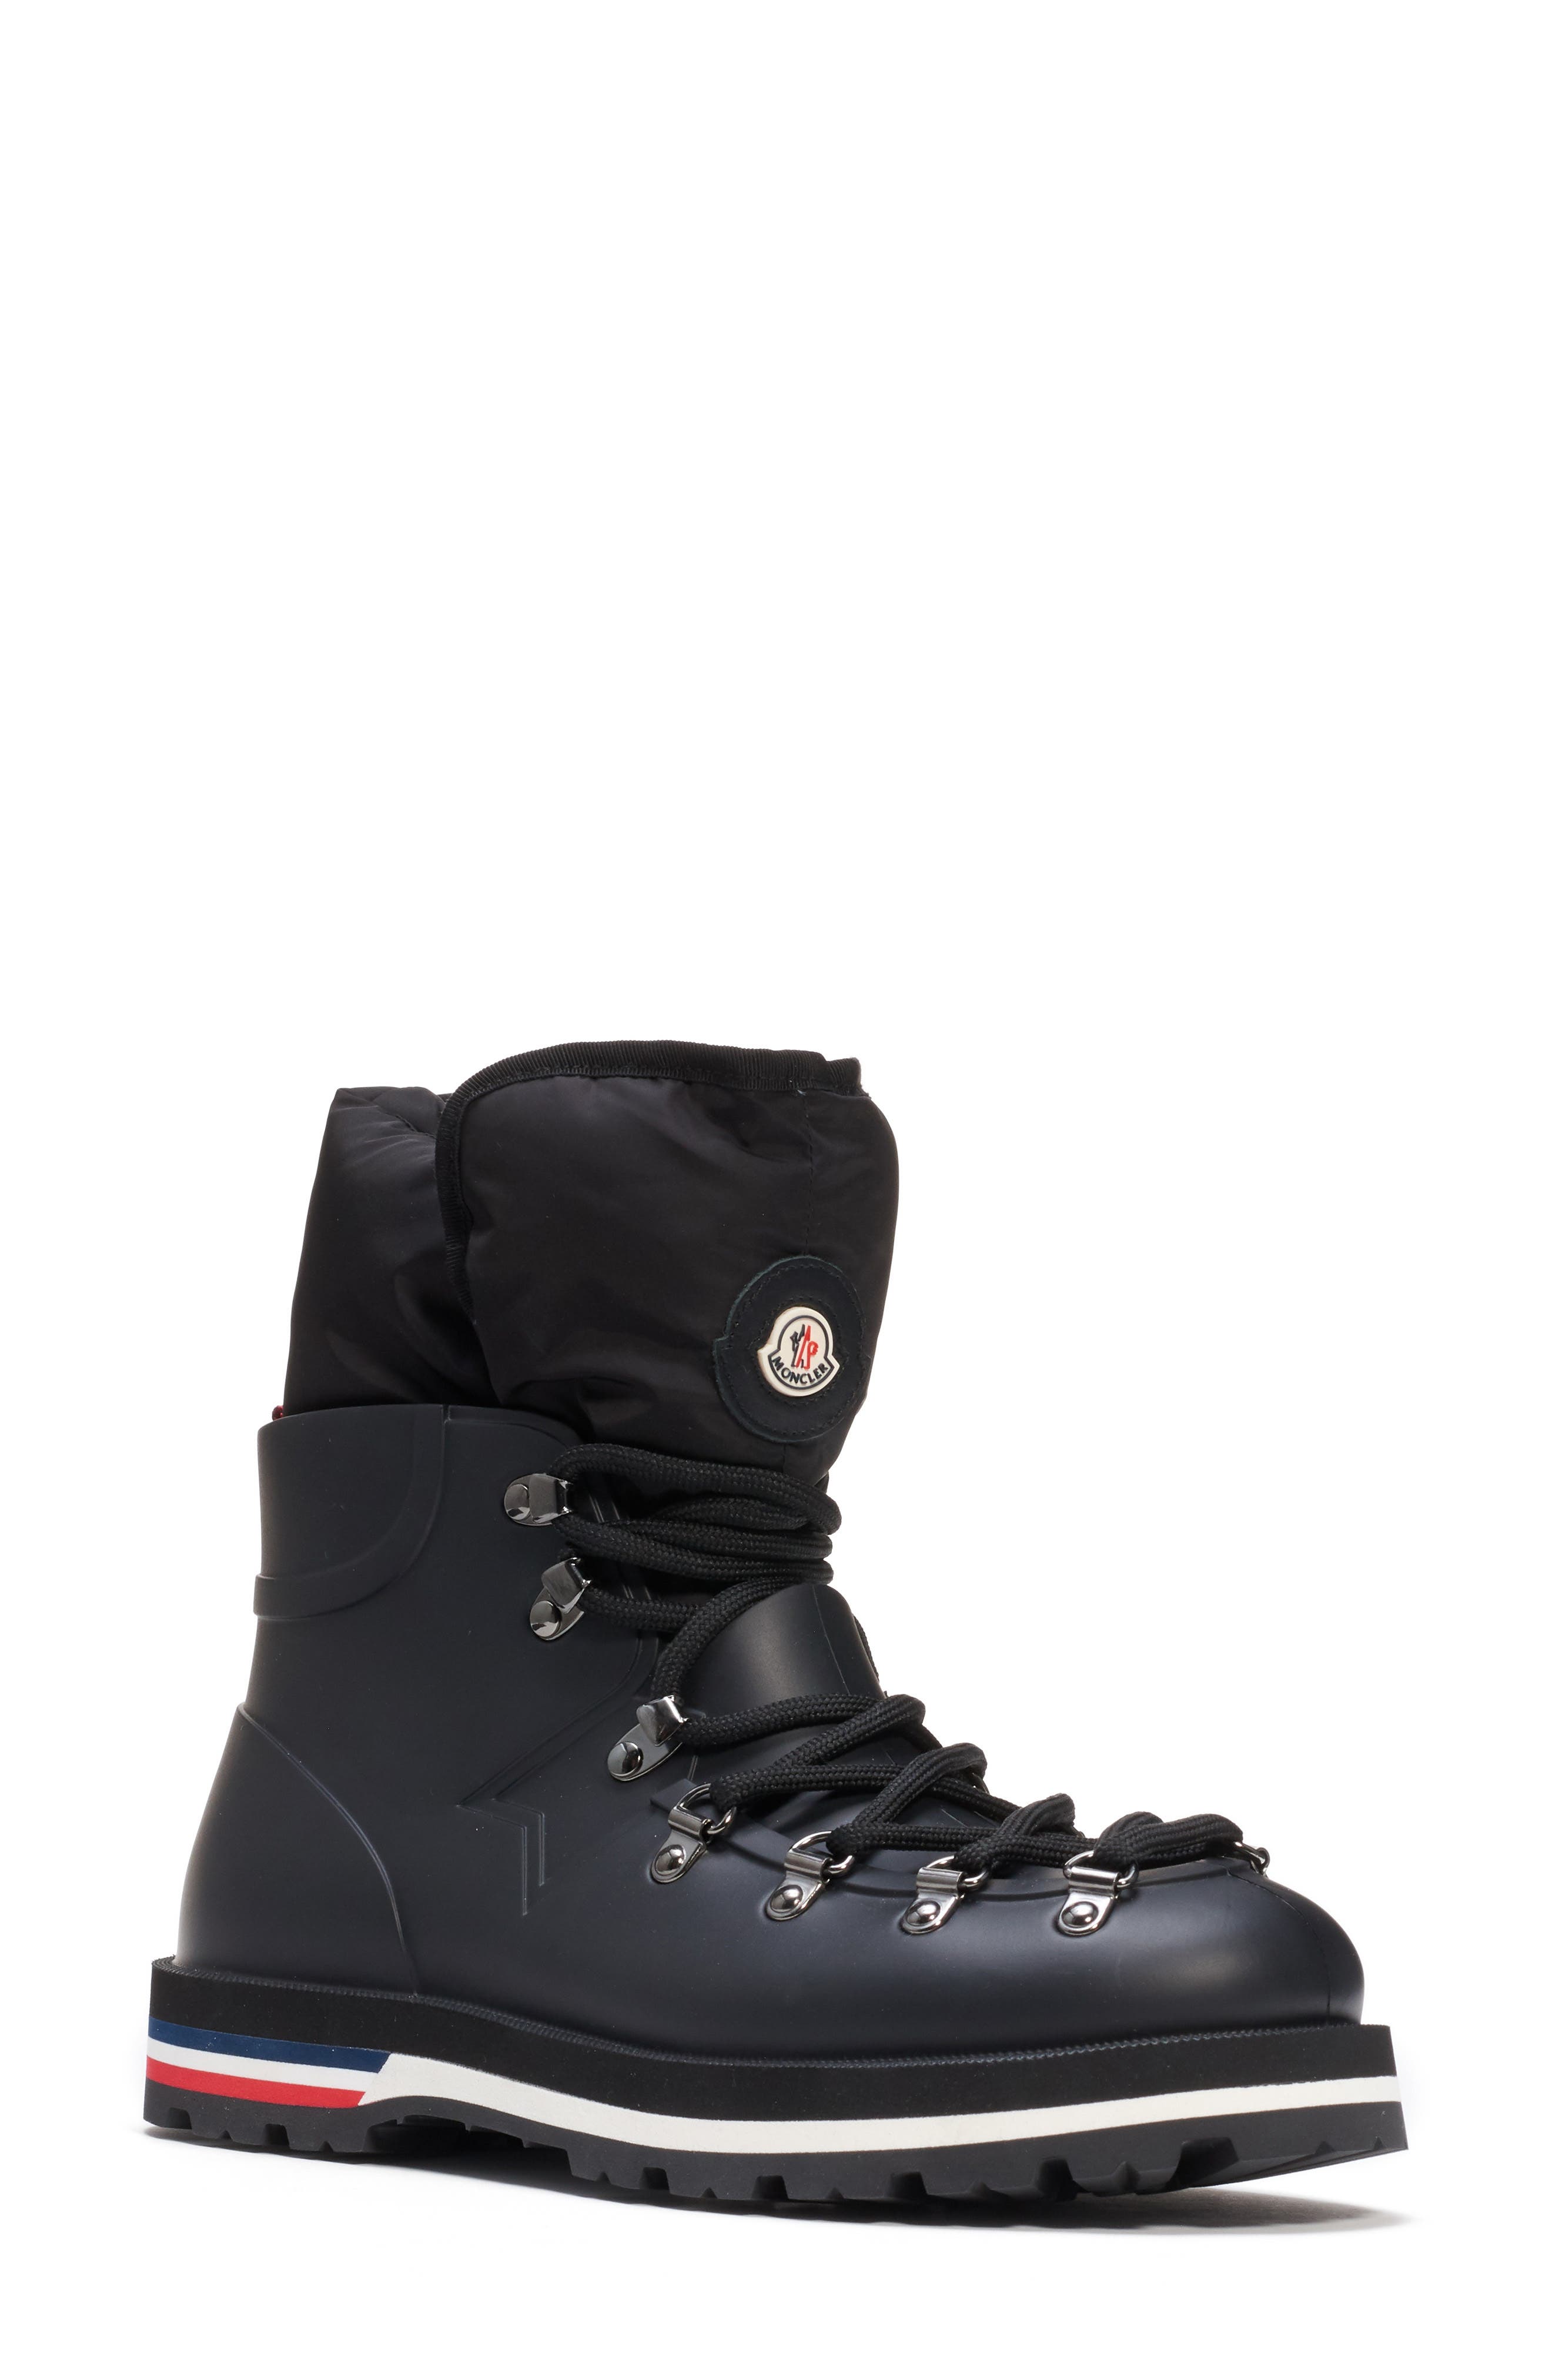 moncler womens snow boots